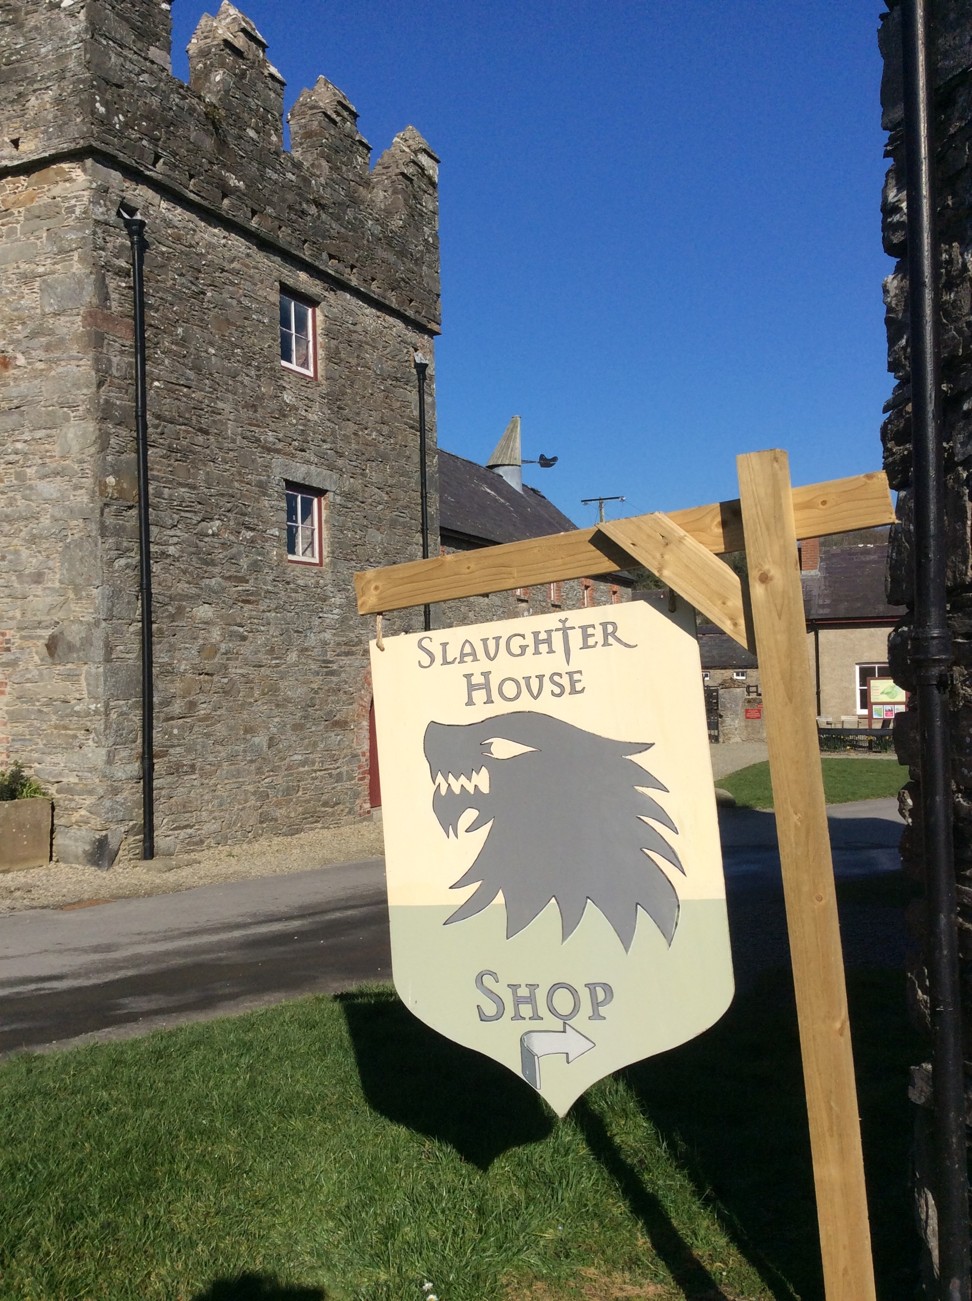 A sign for the Slaughterhouse Shop at Castle Ward, which doubled as Winterfell in Game of Thrones. Photo: Handout